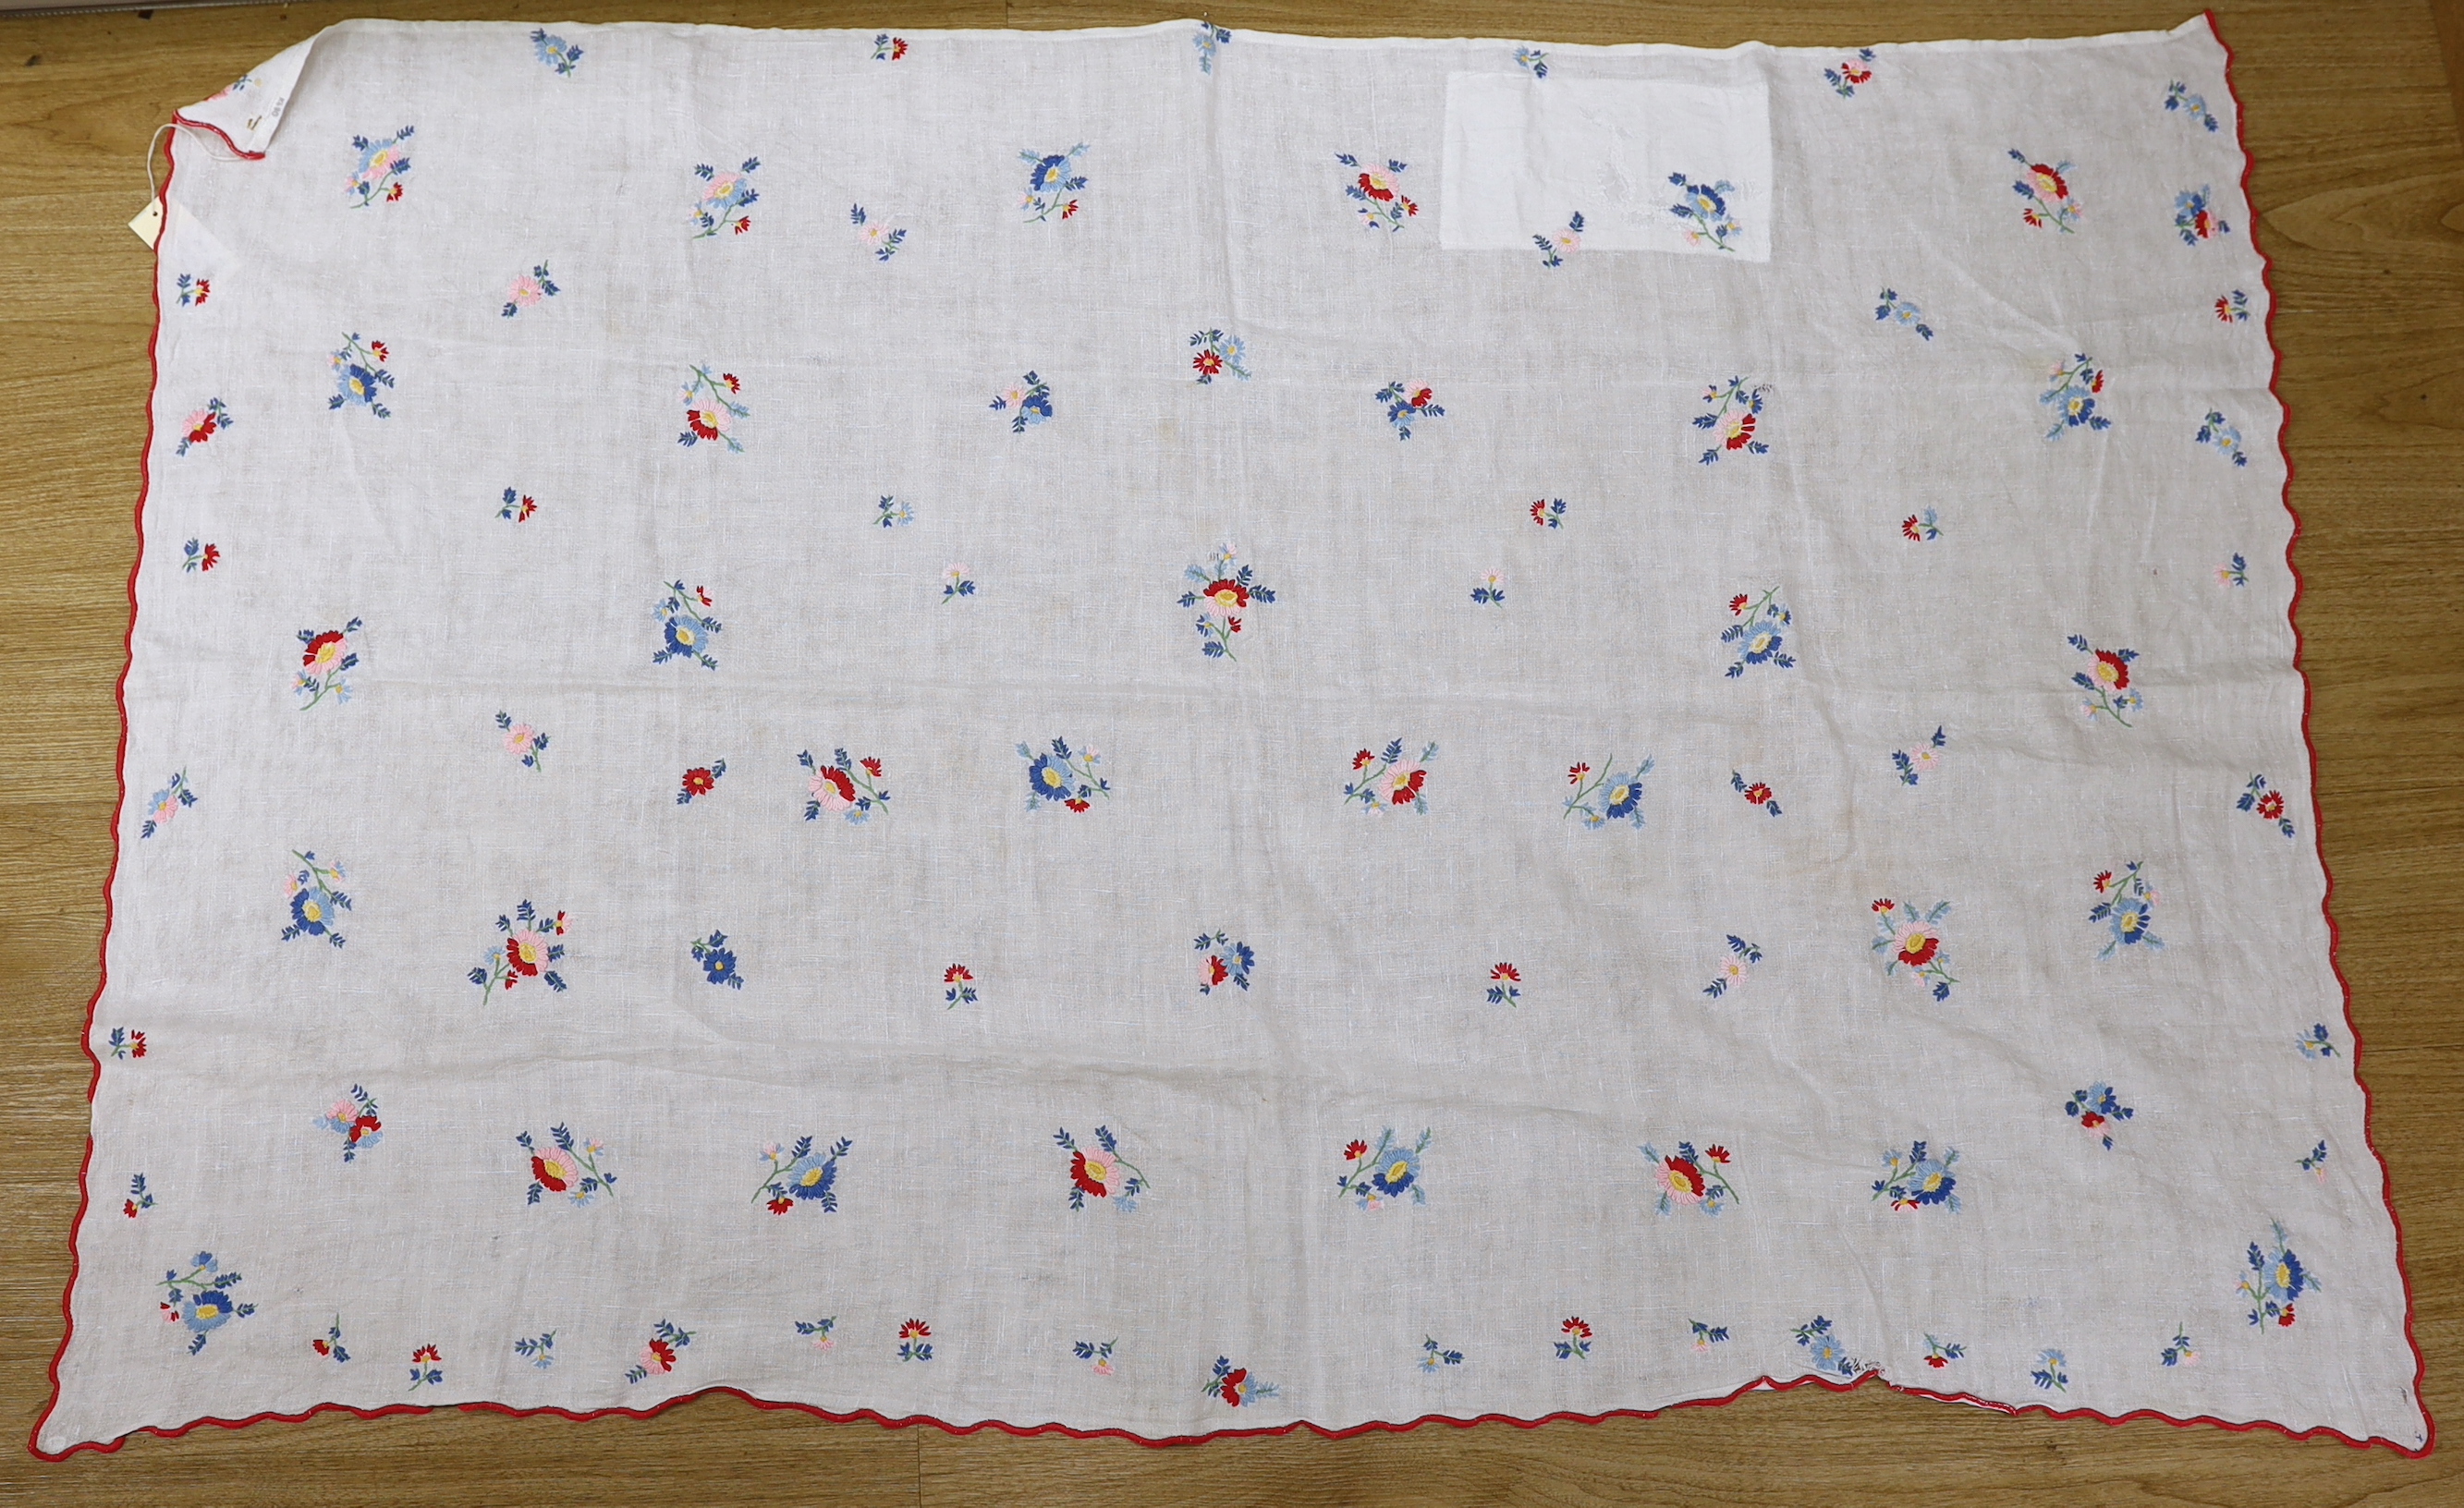 A 20th century woven linen panel, hand embroidered with scattered floral polychrome sprigs and a scalloped red buttonholed embroidered edge, possibly Swiss, 153 x 100cm